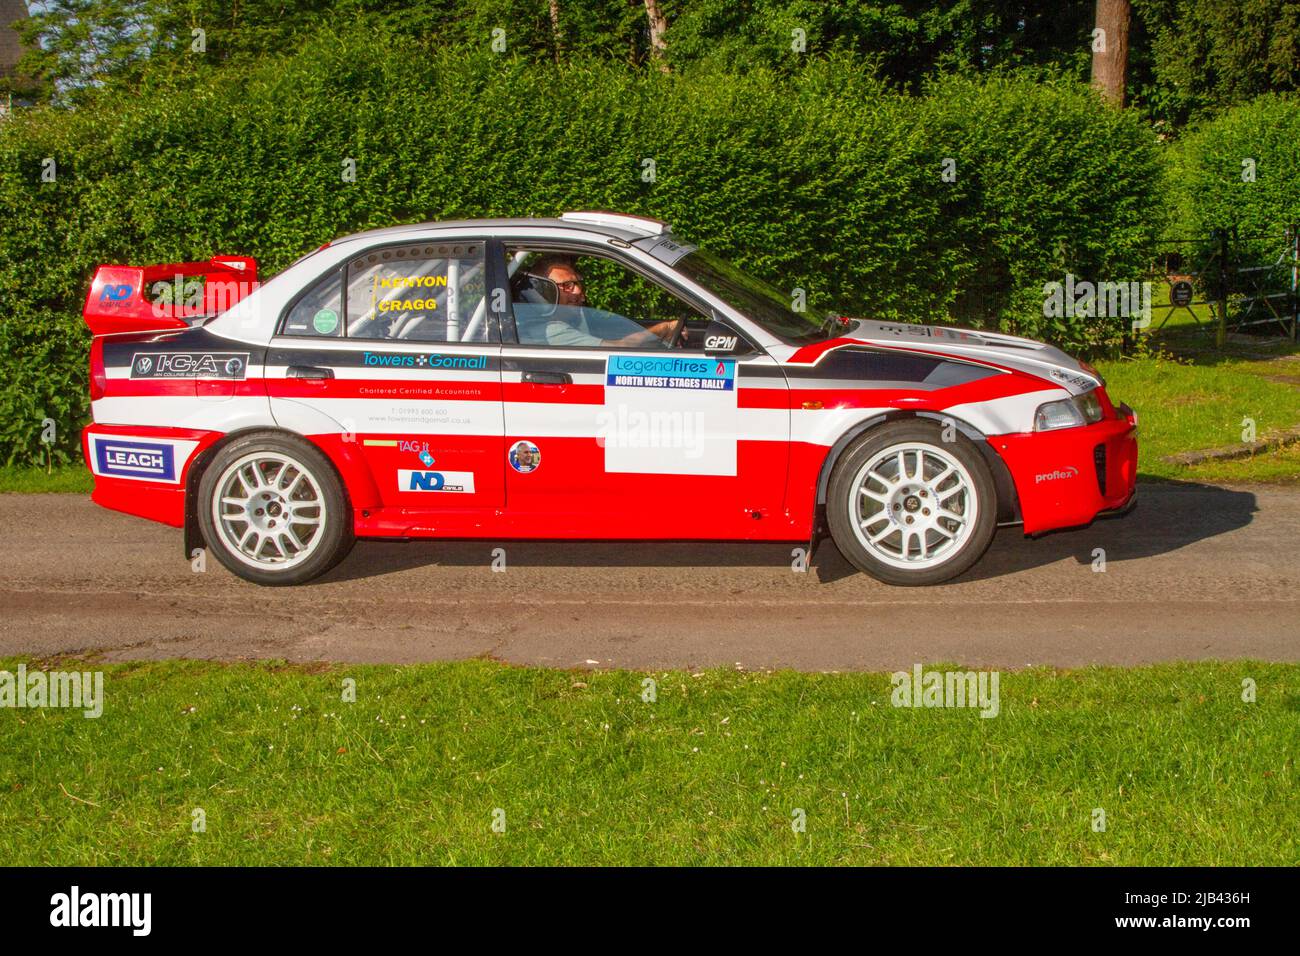 1996 90s nineties Mitsubishi Lancer rally car. Kenyon & Gragg, Kenny, north west stages, red white, arriving in Worden Park Motor Village for the Leyland Festival, UK Stock Photo